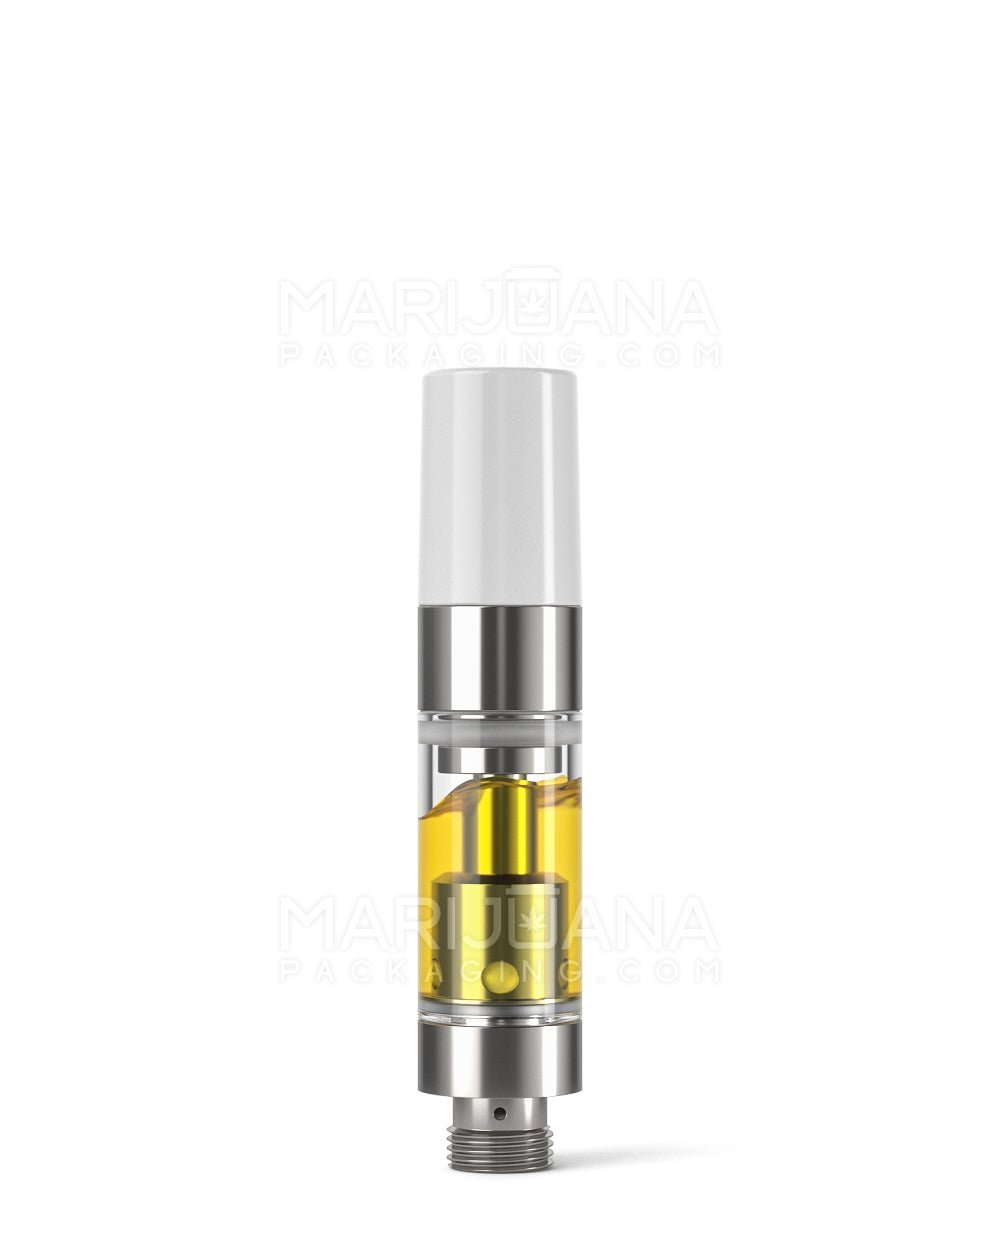 Ceramic Core Glass Vape Cartridge with Round White Plastic Mouthpiece | 0.5mL - Press On - 100 Count - 2